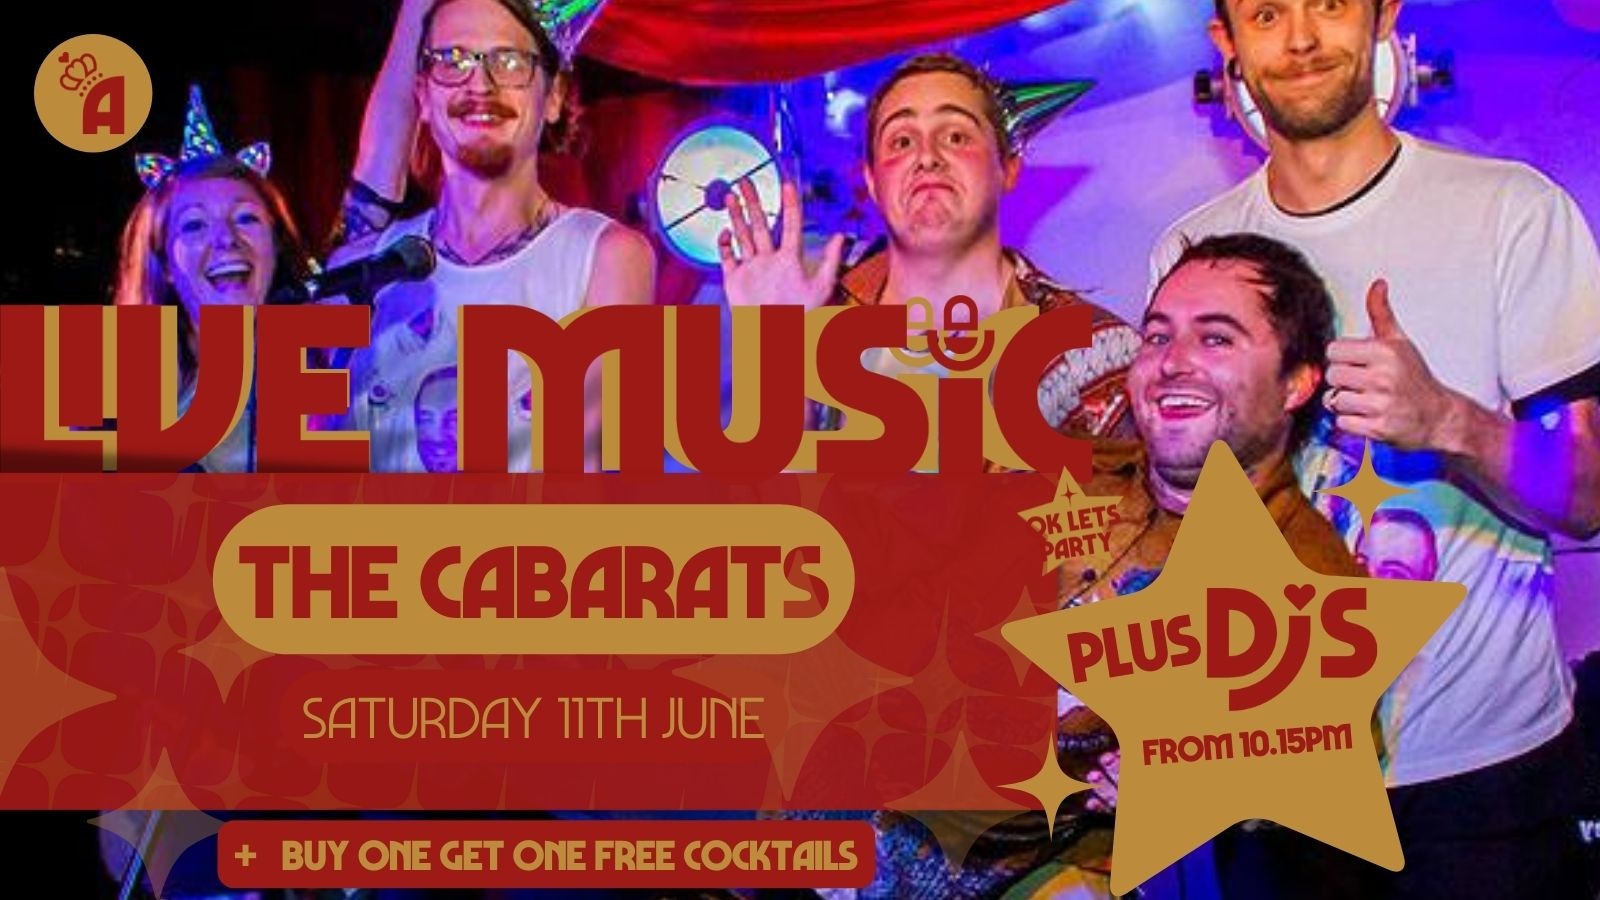 Live Music: THE CABARATS // Annabel’s Cabaret & Discotheque, Plymouth